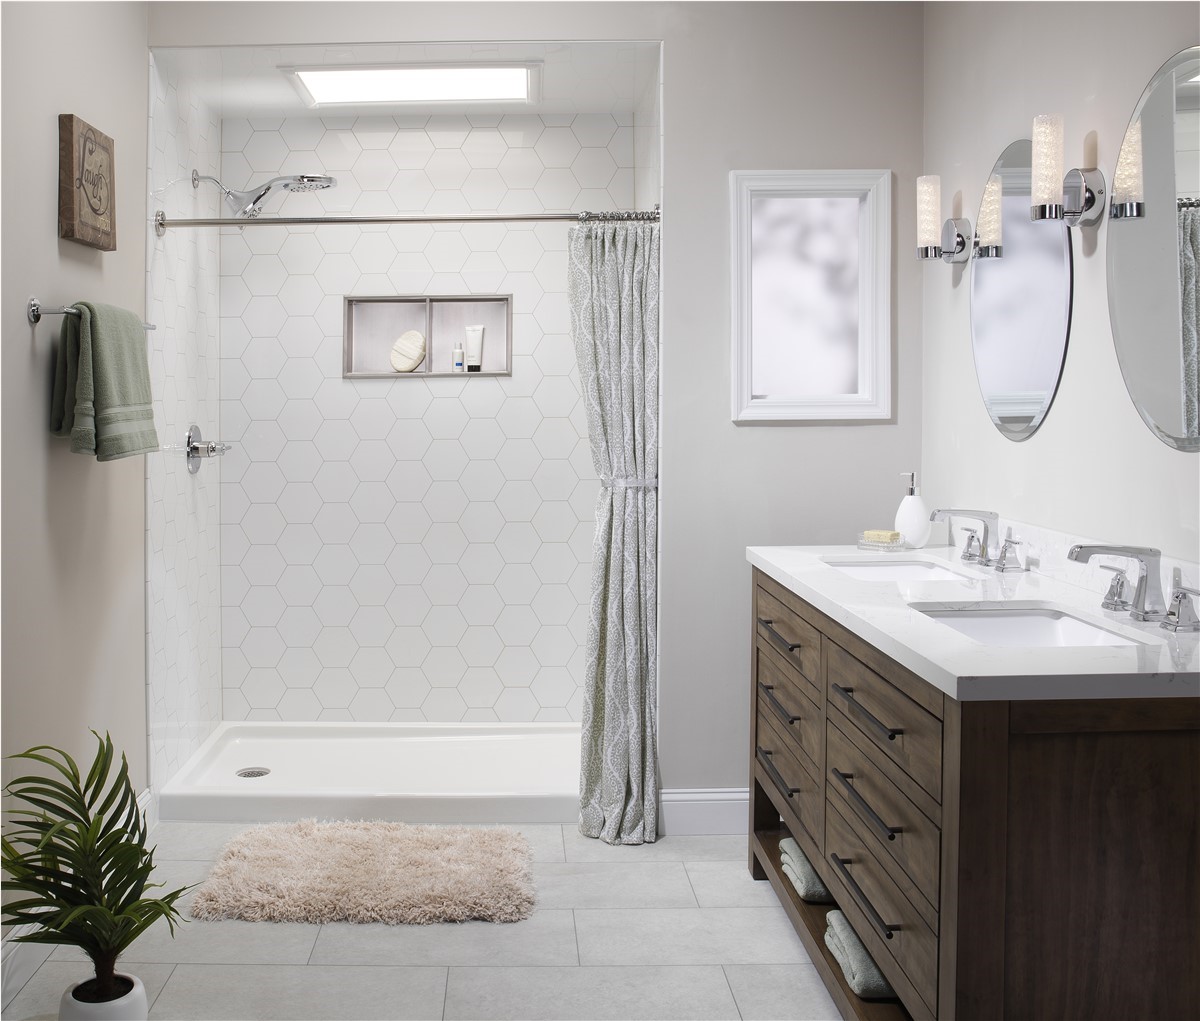 Top 5 Colors To Pick When Starting a Memphis Bathroom Remodel For Resale